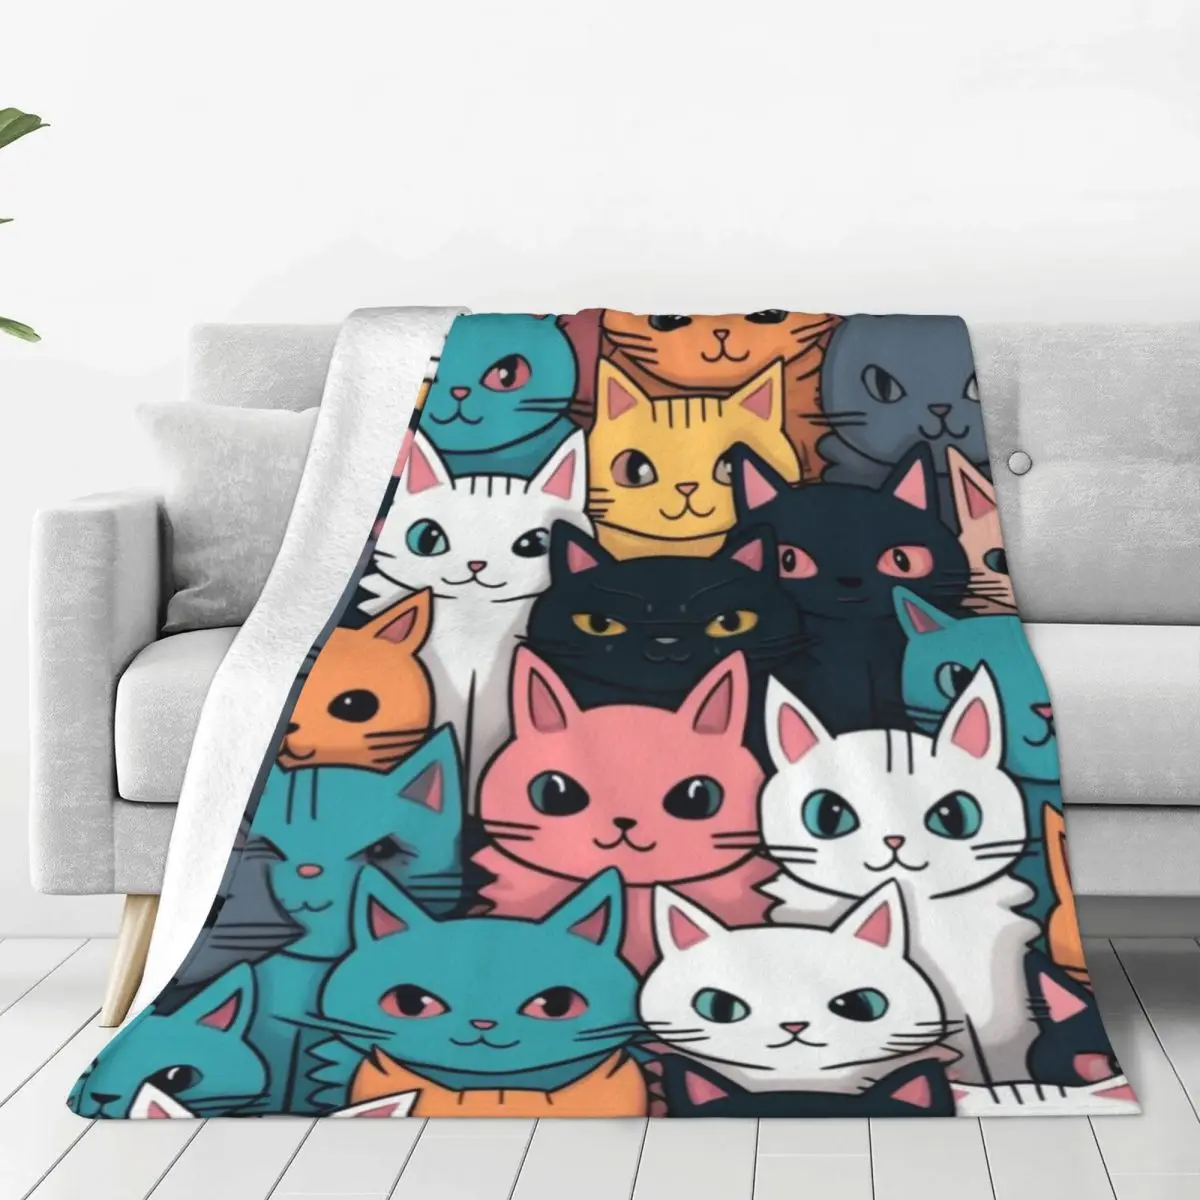 

Super Soft Blankets Picnic Colorful Cat Throw Blanket Pet Kawaii Flannel Bedspread Couch Chair Aesthetic Sofa Bed Cover